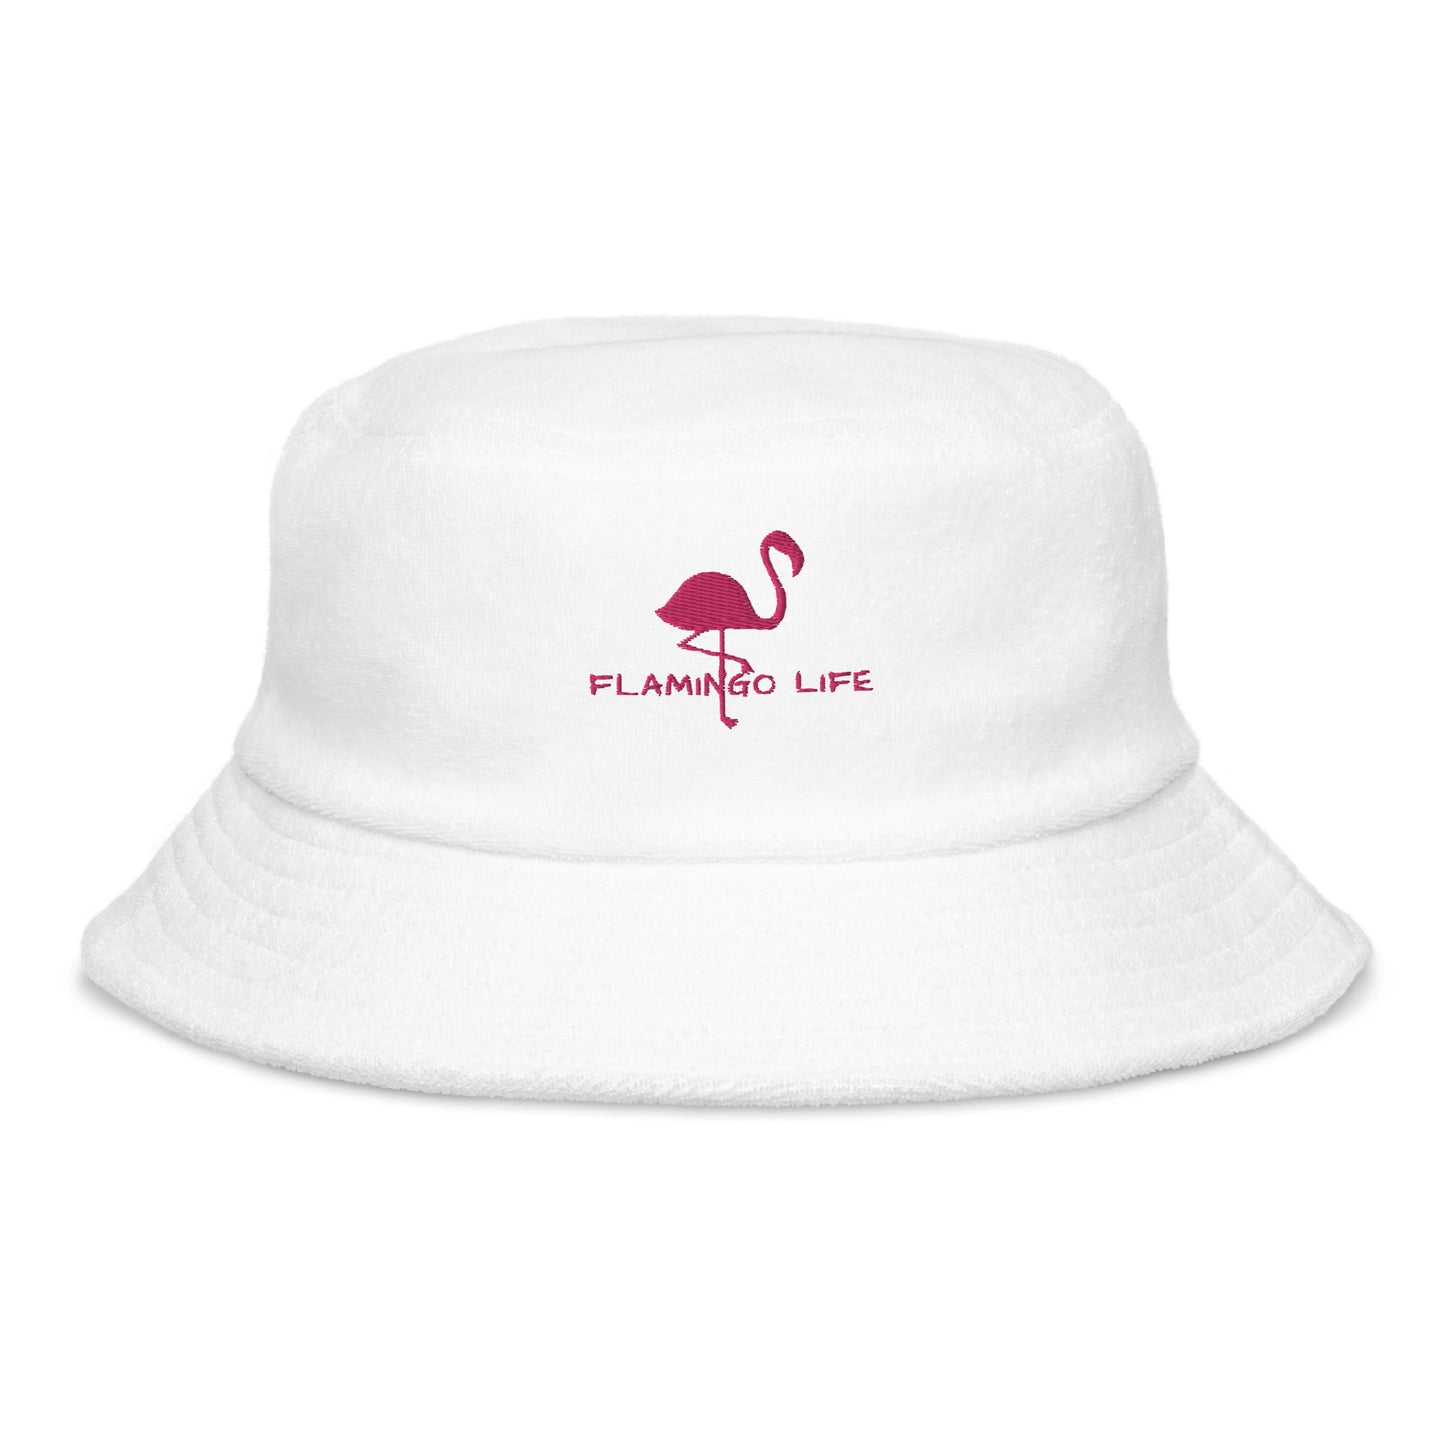 Flamingo Life® Embroidered Terry Cloth Bucket Hat (in 5 colors)